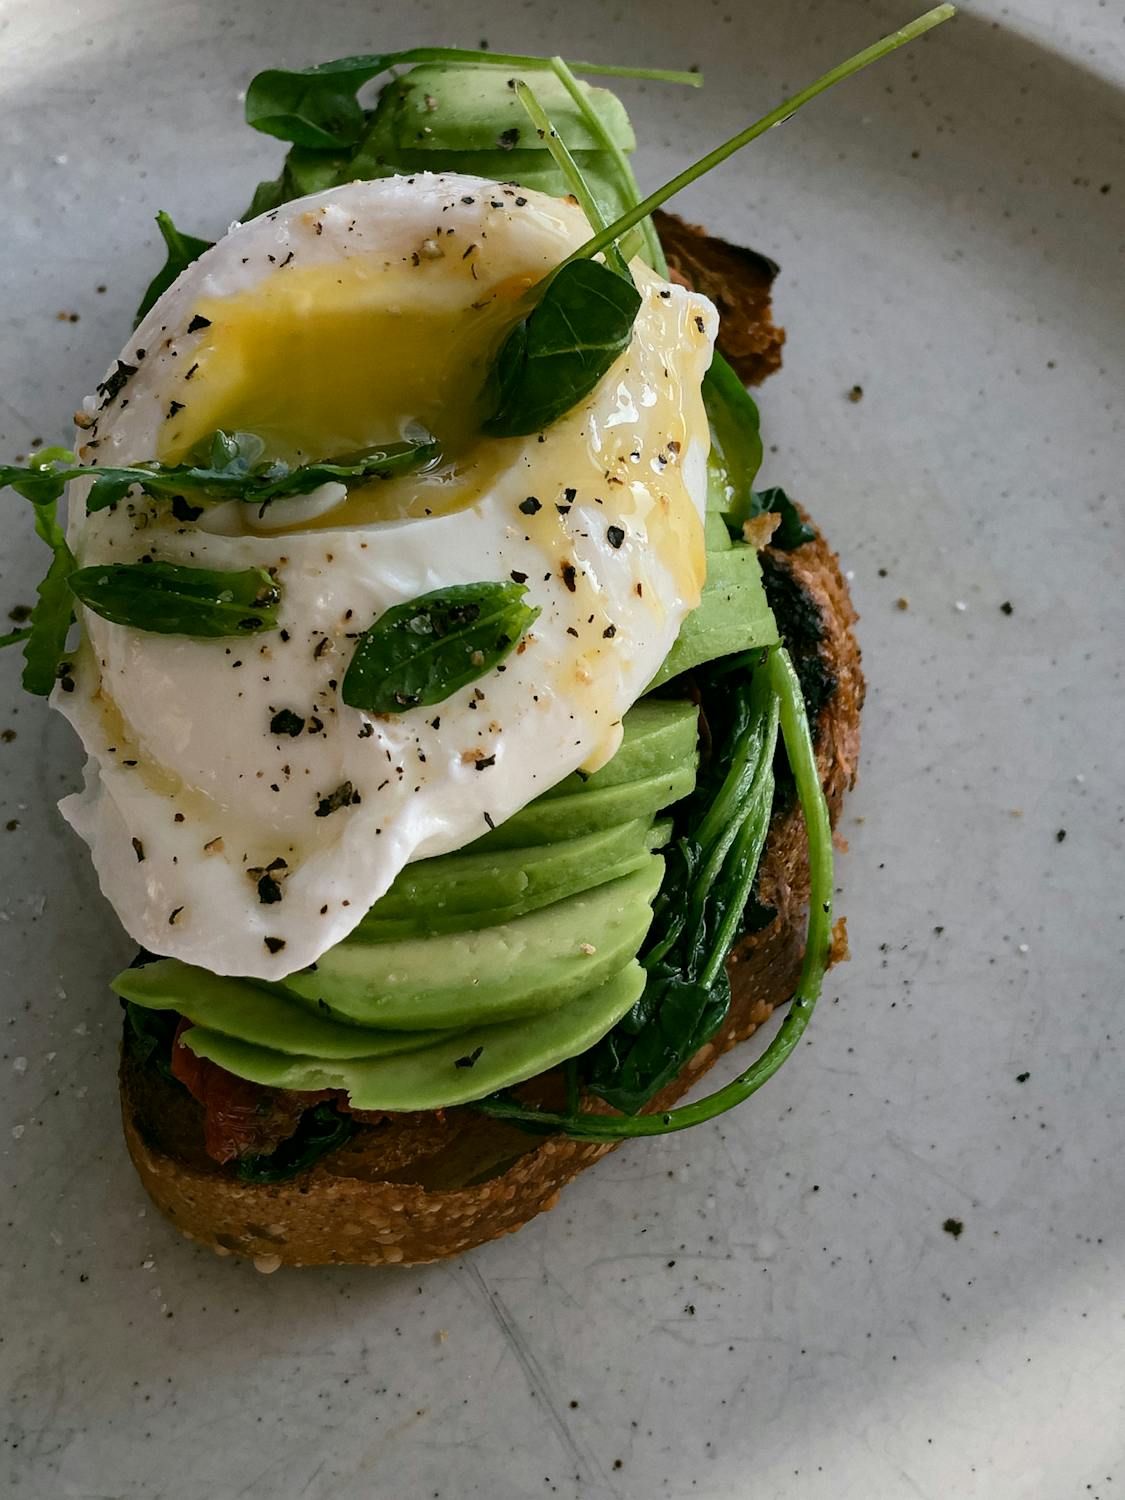 avocado toast with egg on top